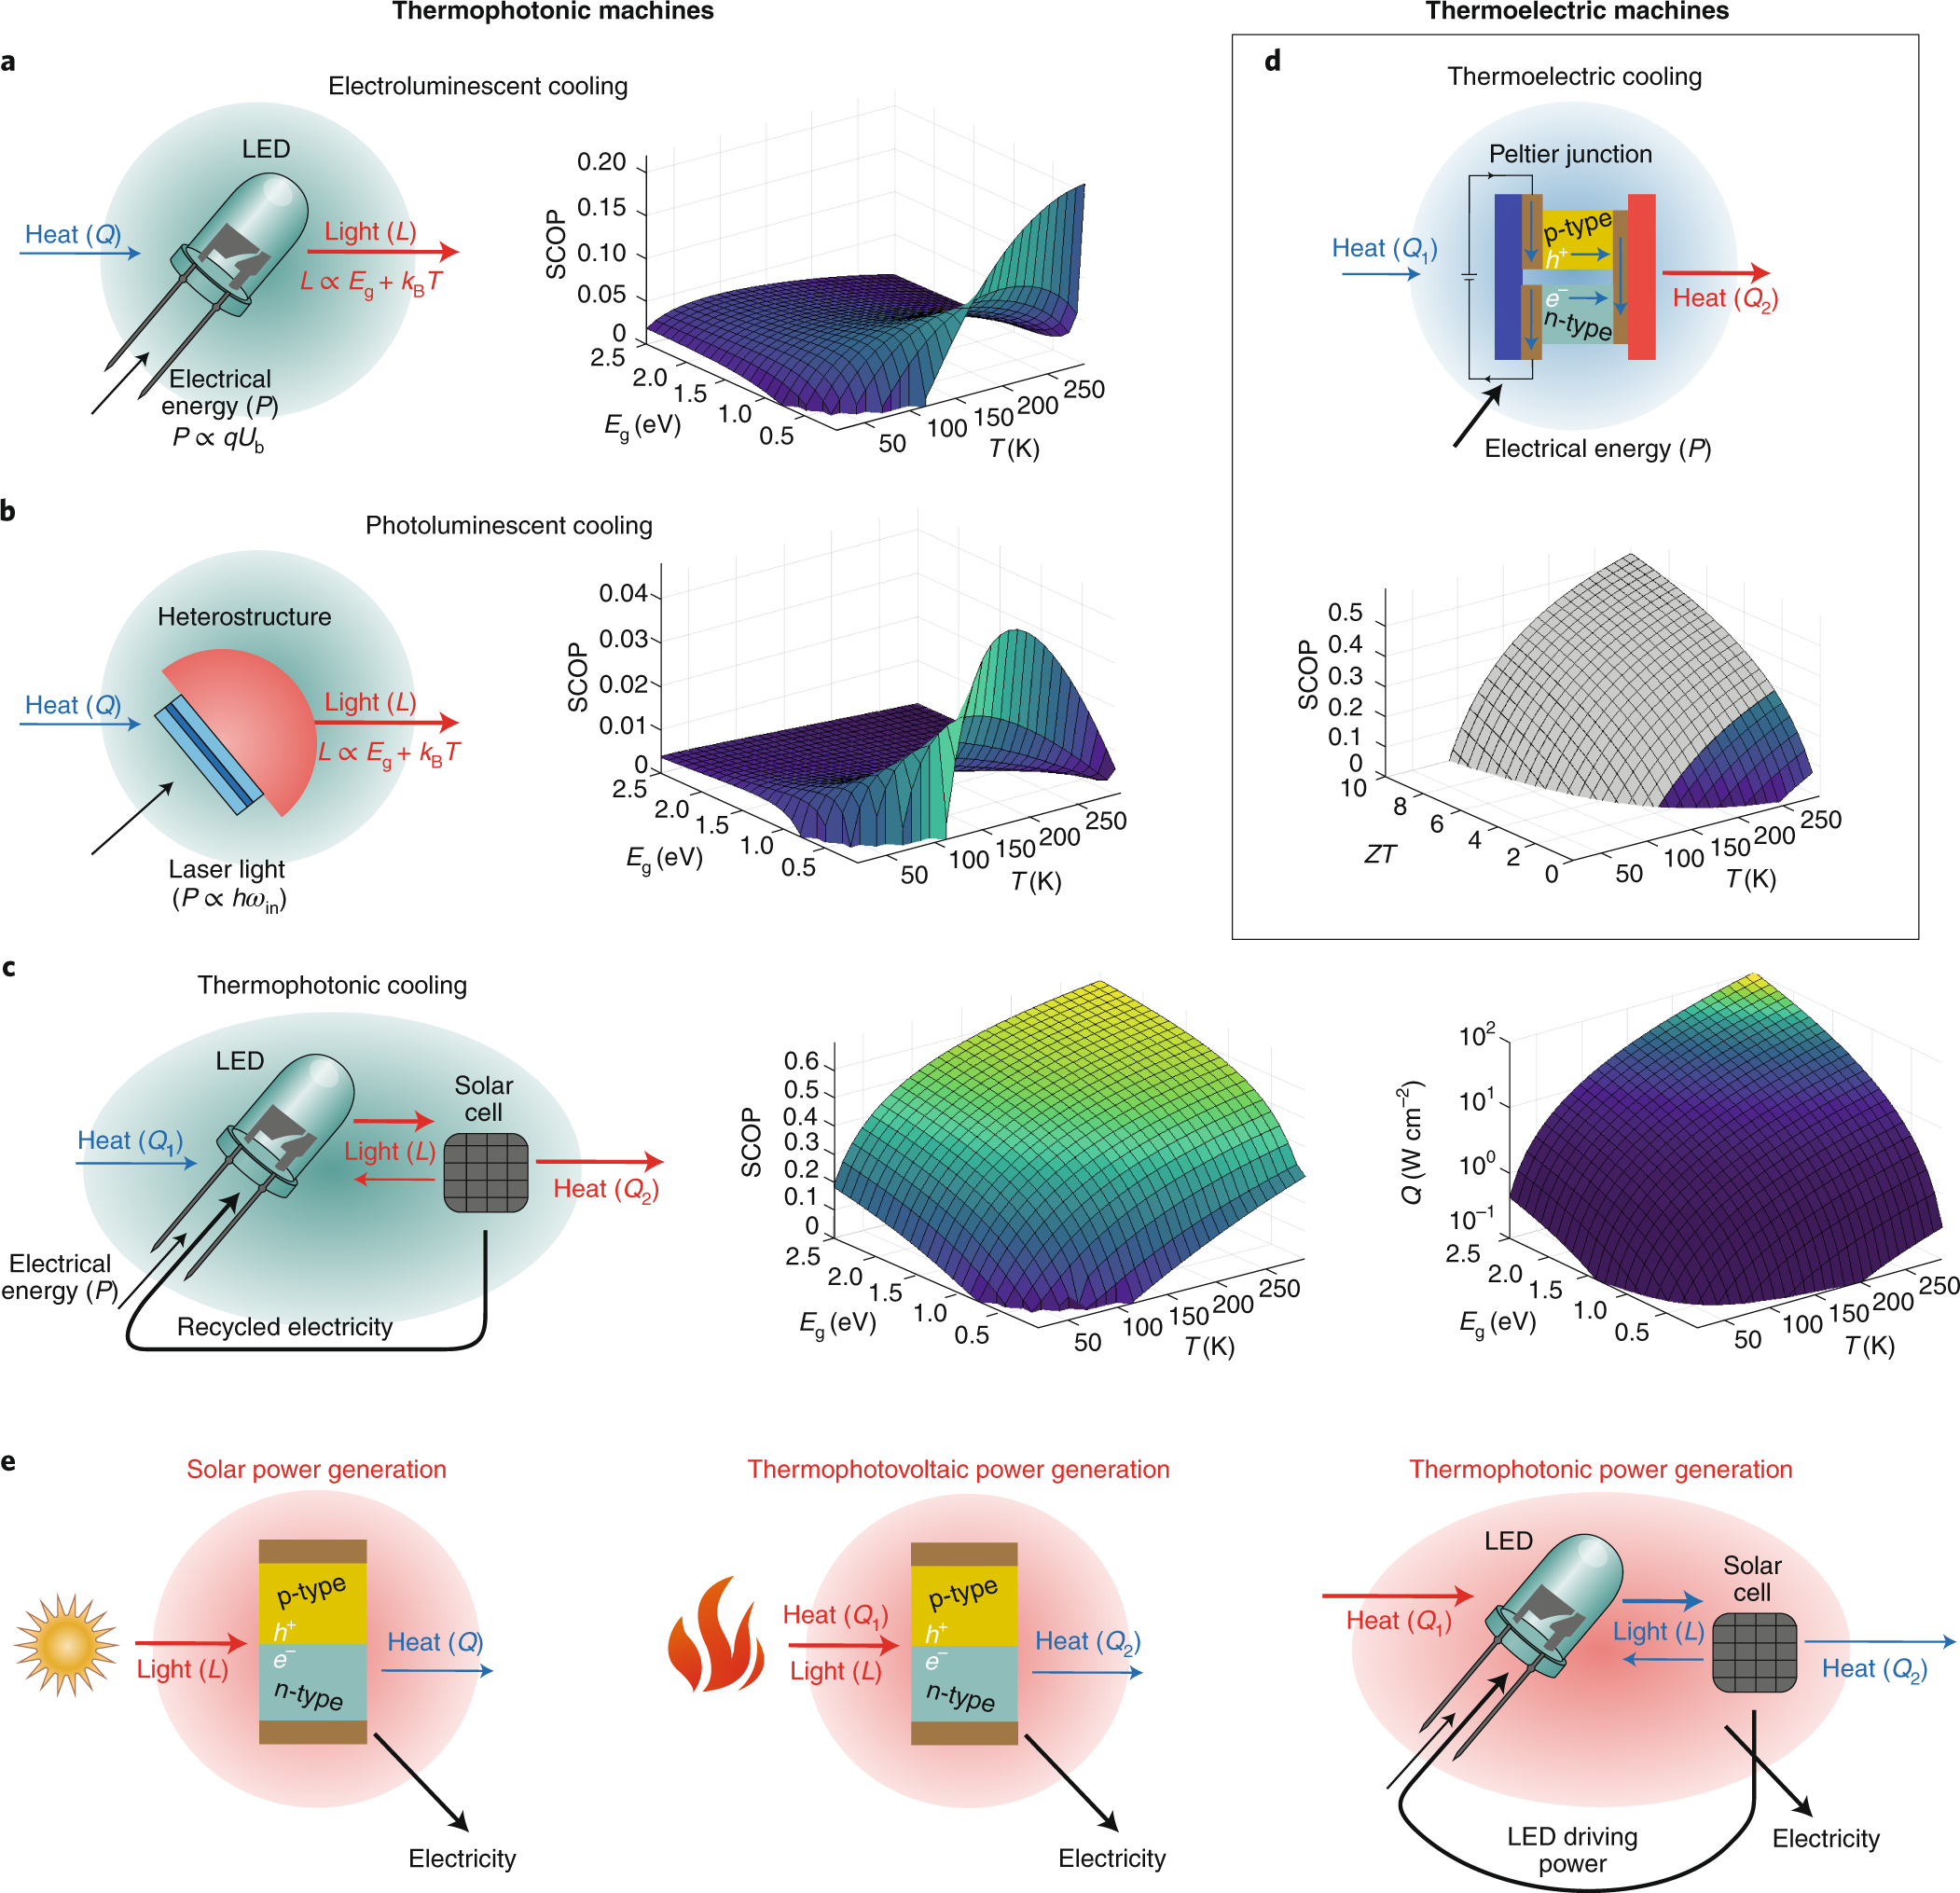 Thermophotonic cooling with light-emitting diodes | Nature Photonics